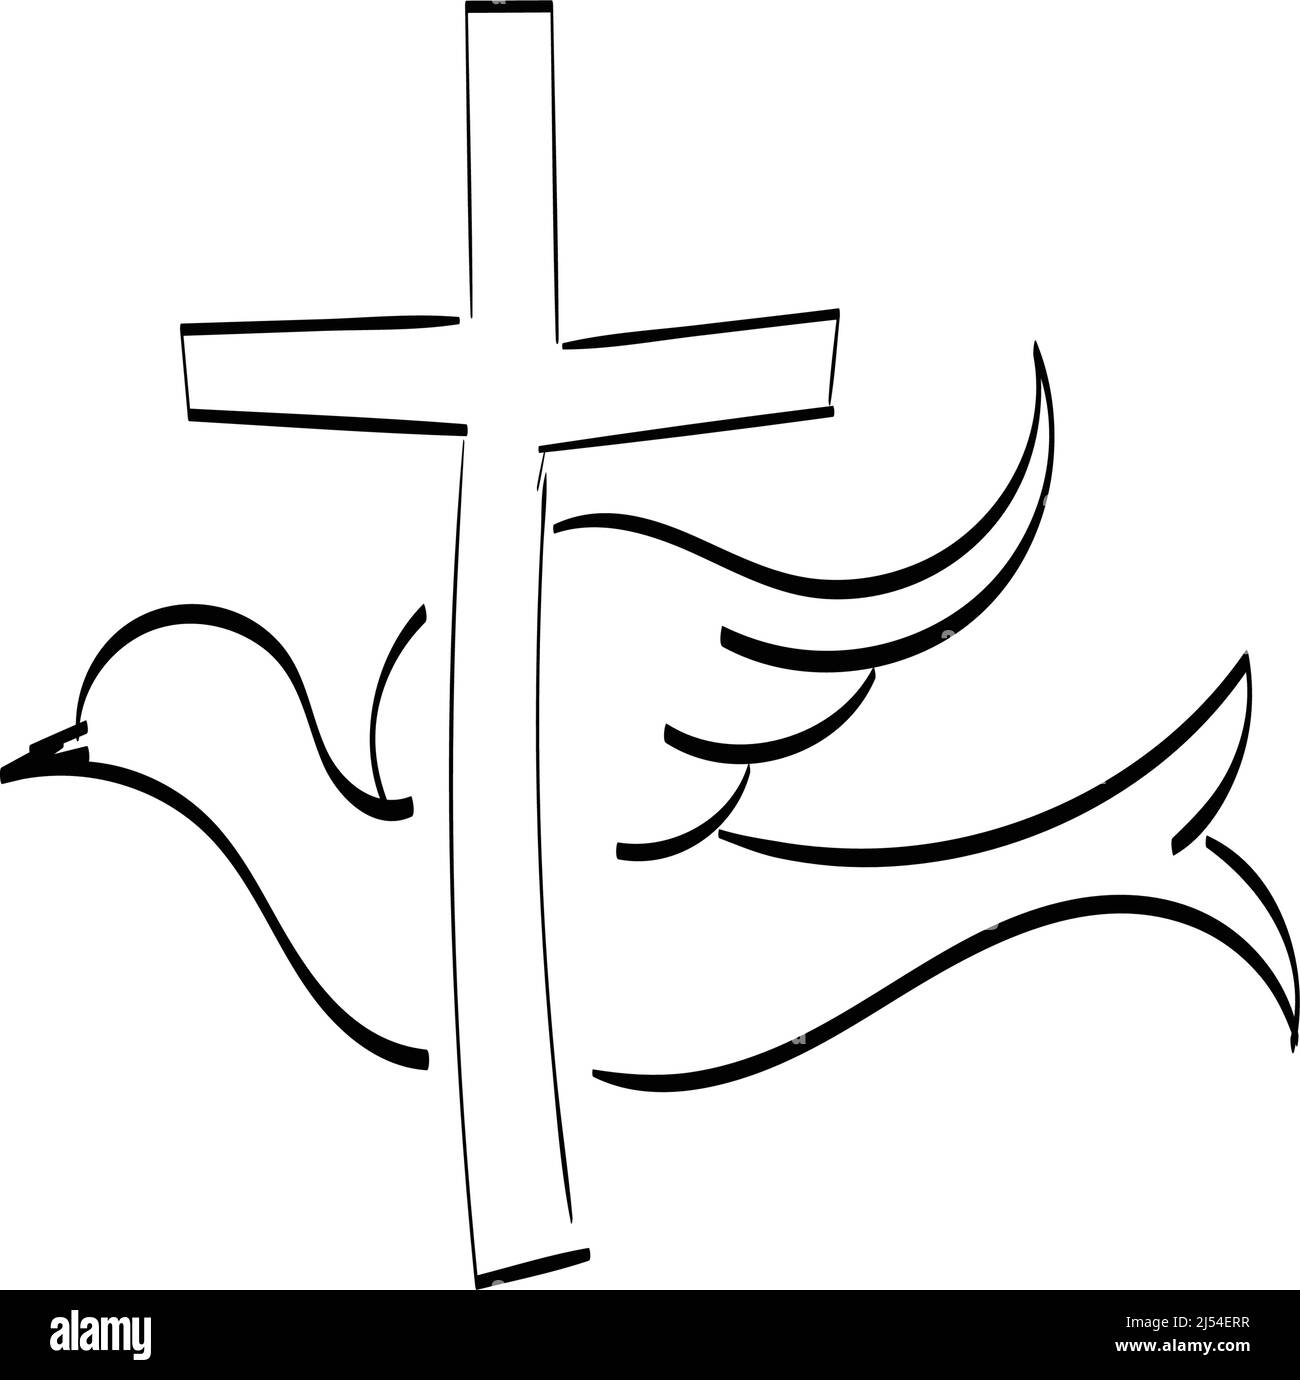 Jesus cross clipart black and white stock photos images